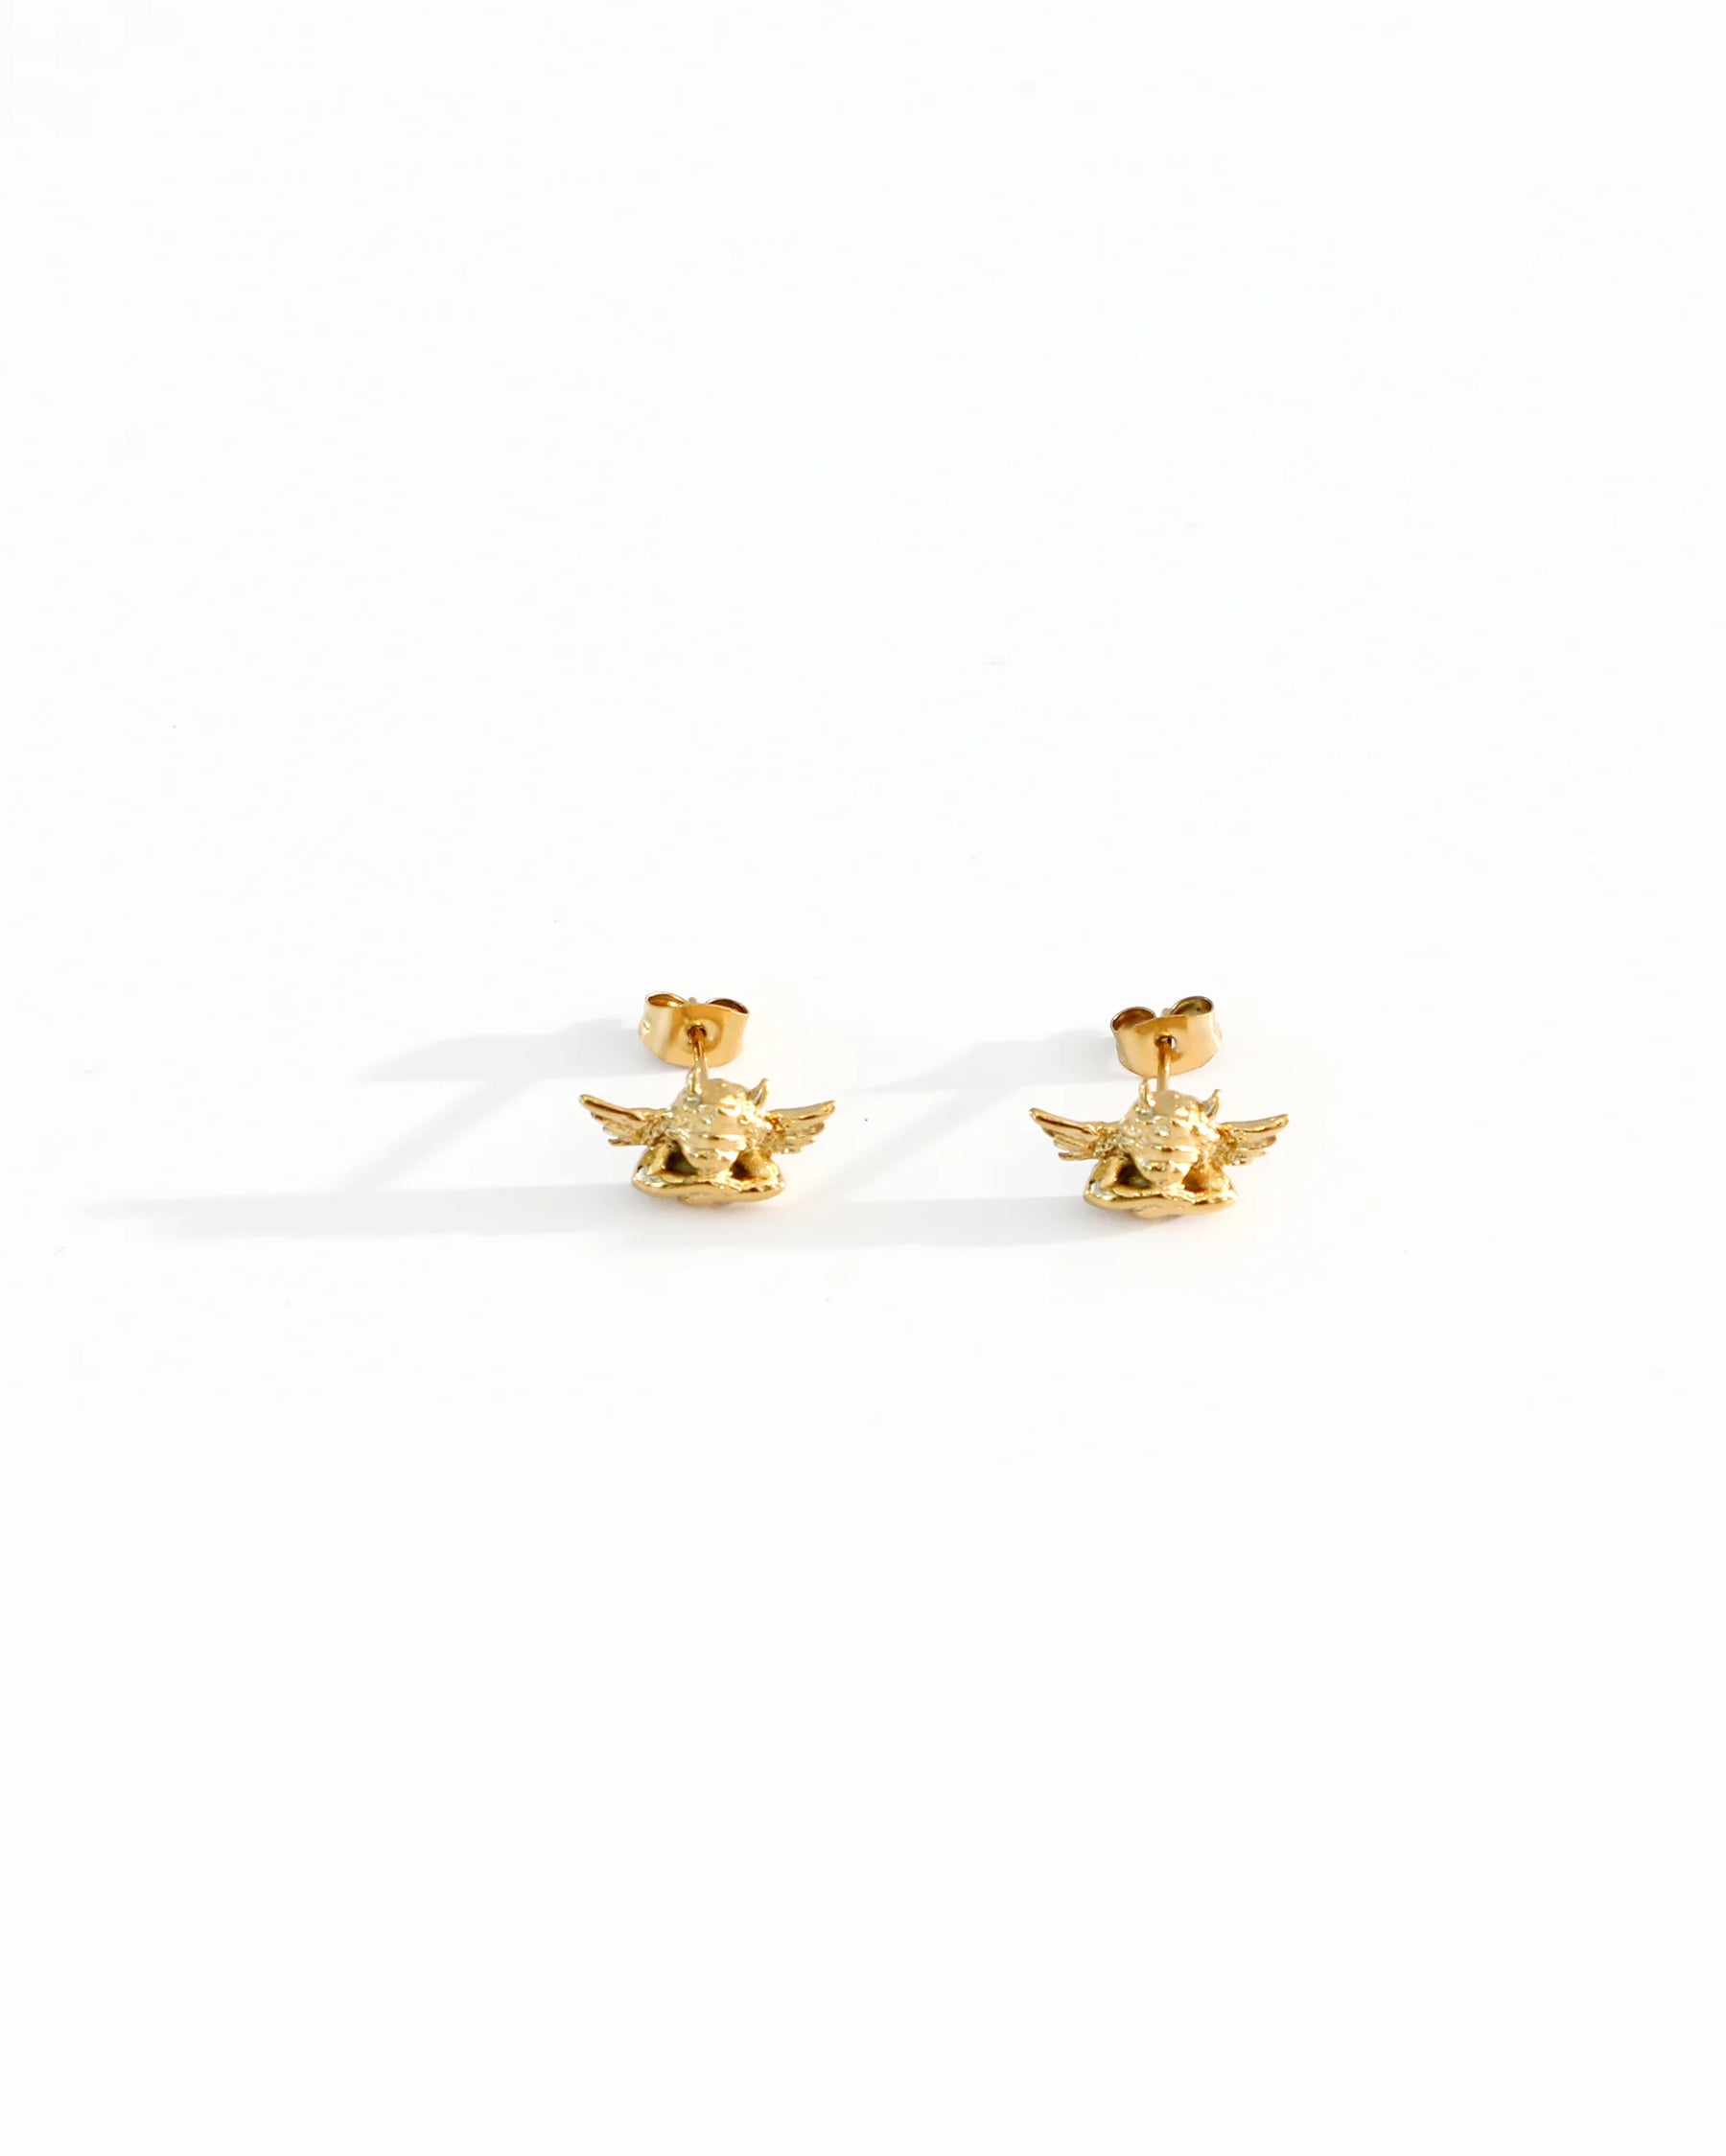 Boys Lie Gold Stud Earrings - ONFEMME By Lindsey's Kloset